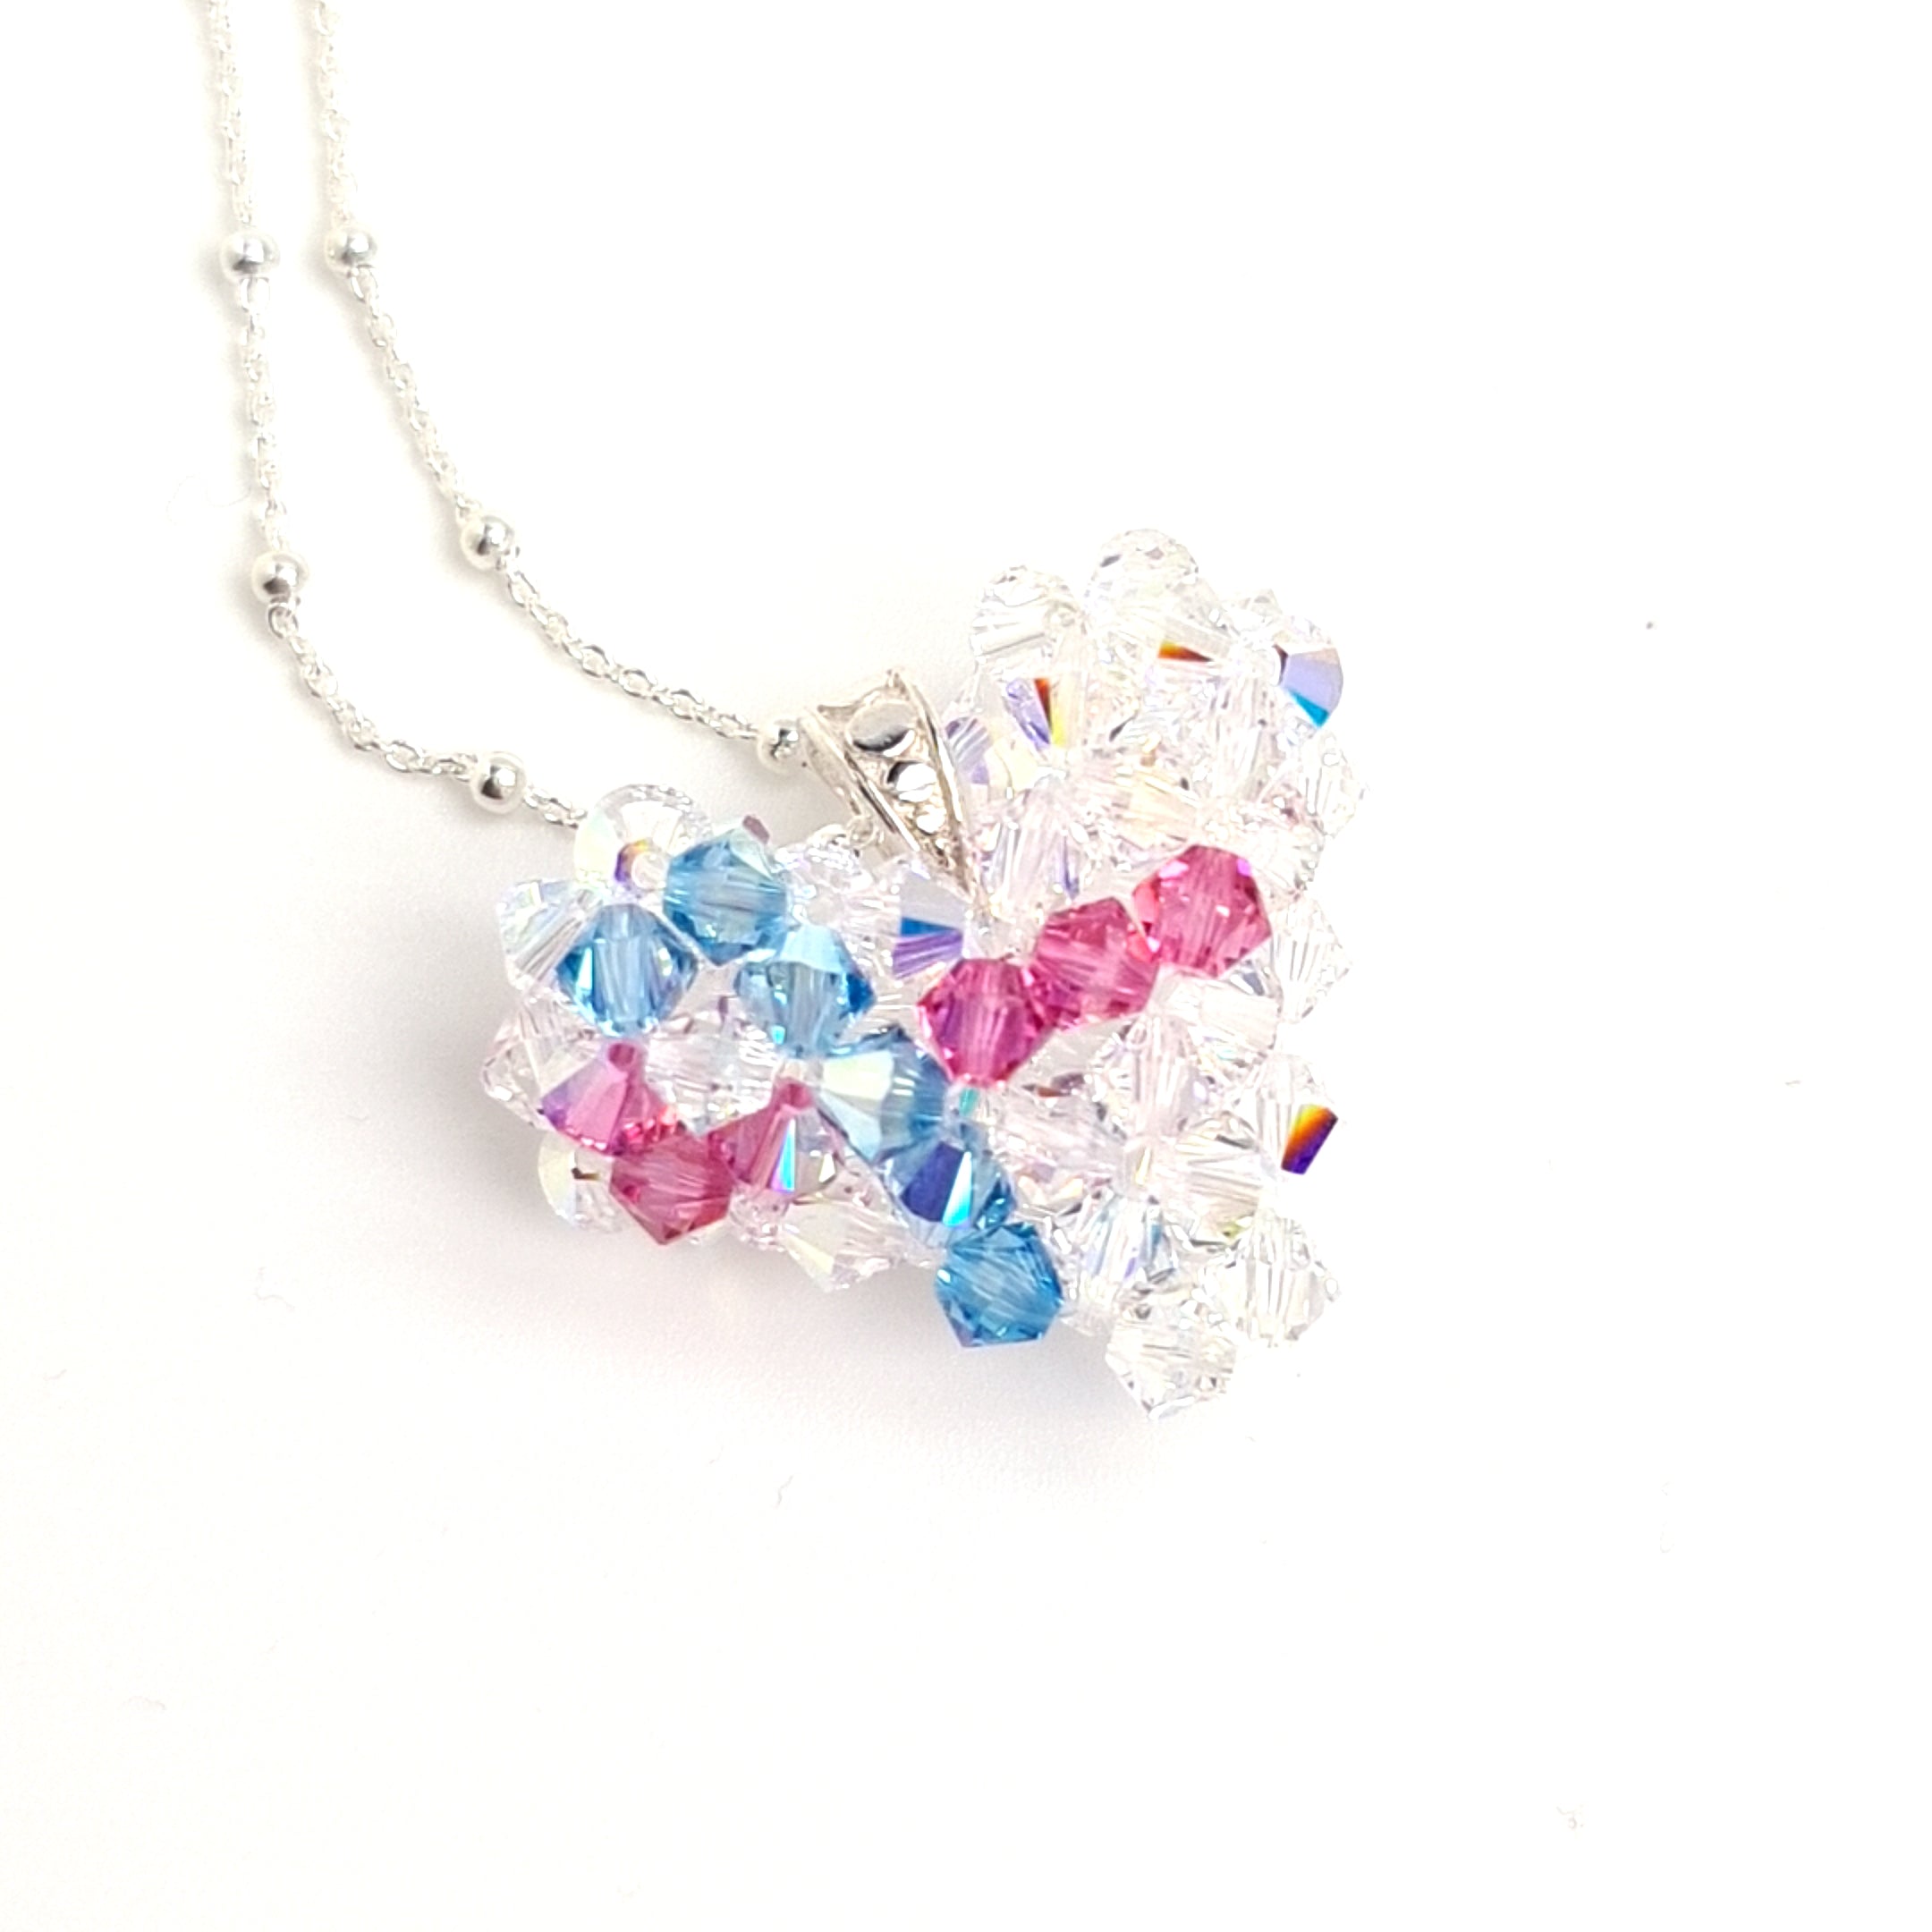 Stillbirth Awareness Ribbon of Hope Heart Silver Necklace with a handmade puffy heart pendant made with 72 crystals in Crystal Clear, pink and blue, a symbol of Baby or Child Loss, Miscarriage in Ireland by Magpie Gems. This is a perfect memorial gift for someone that is grieving a child loss.